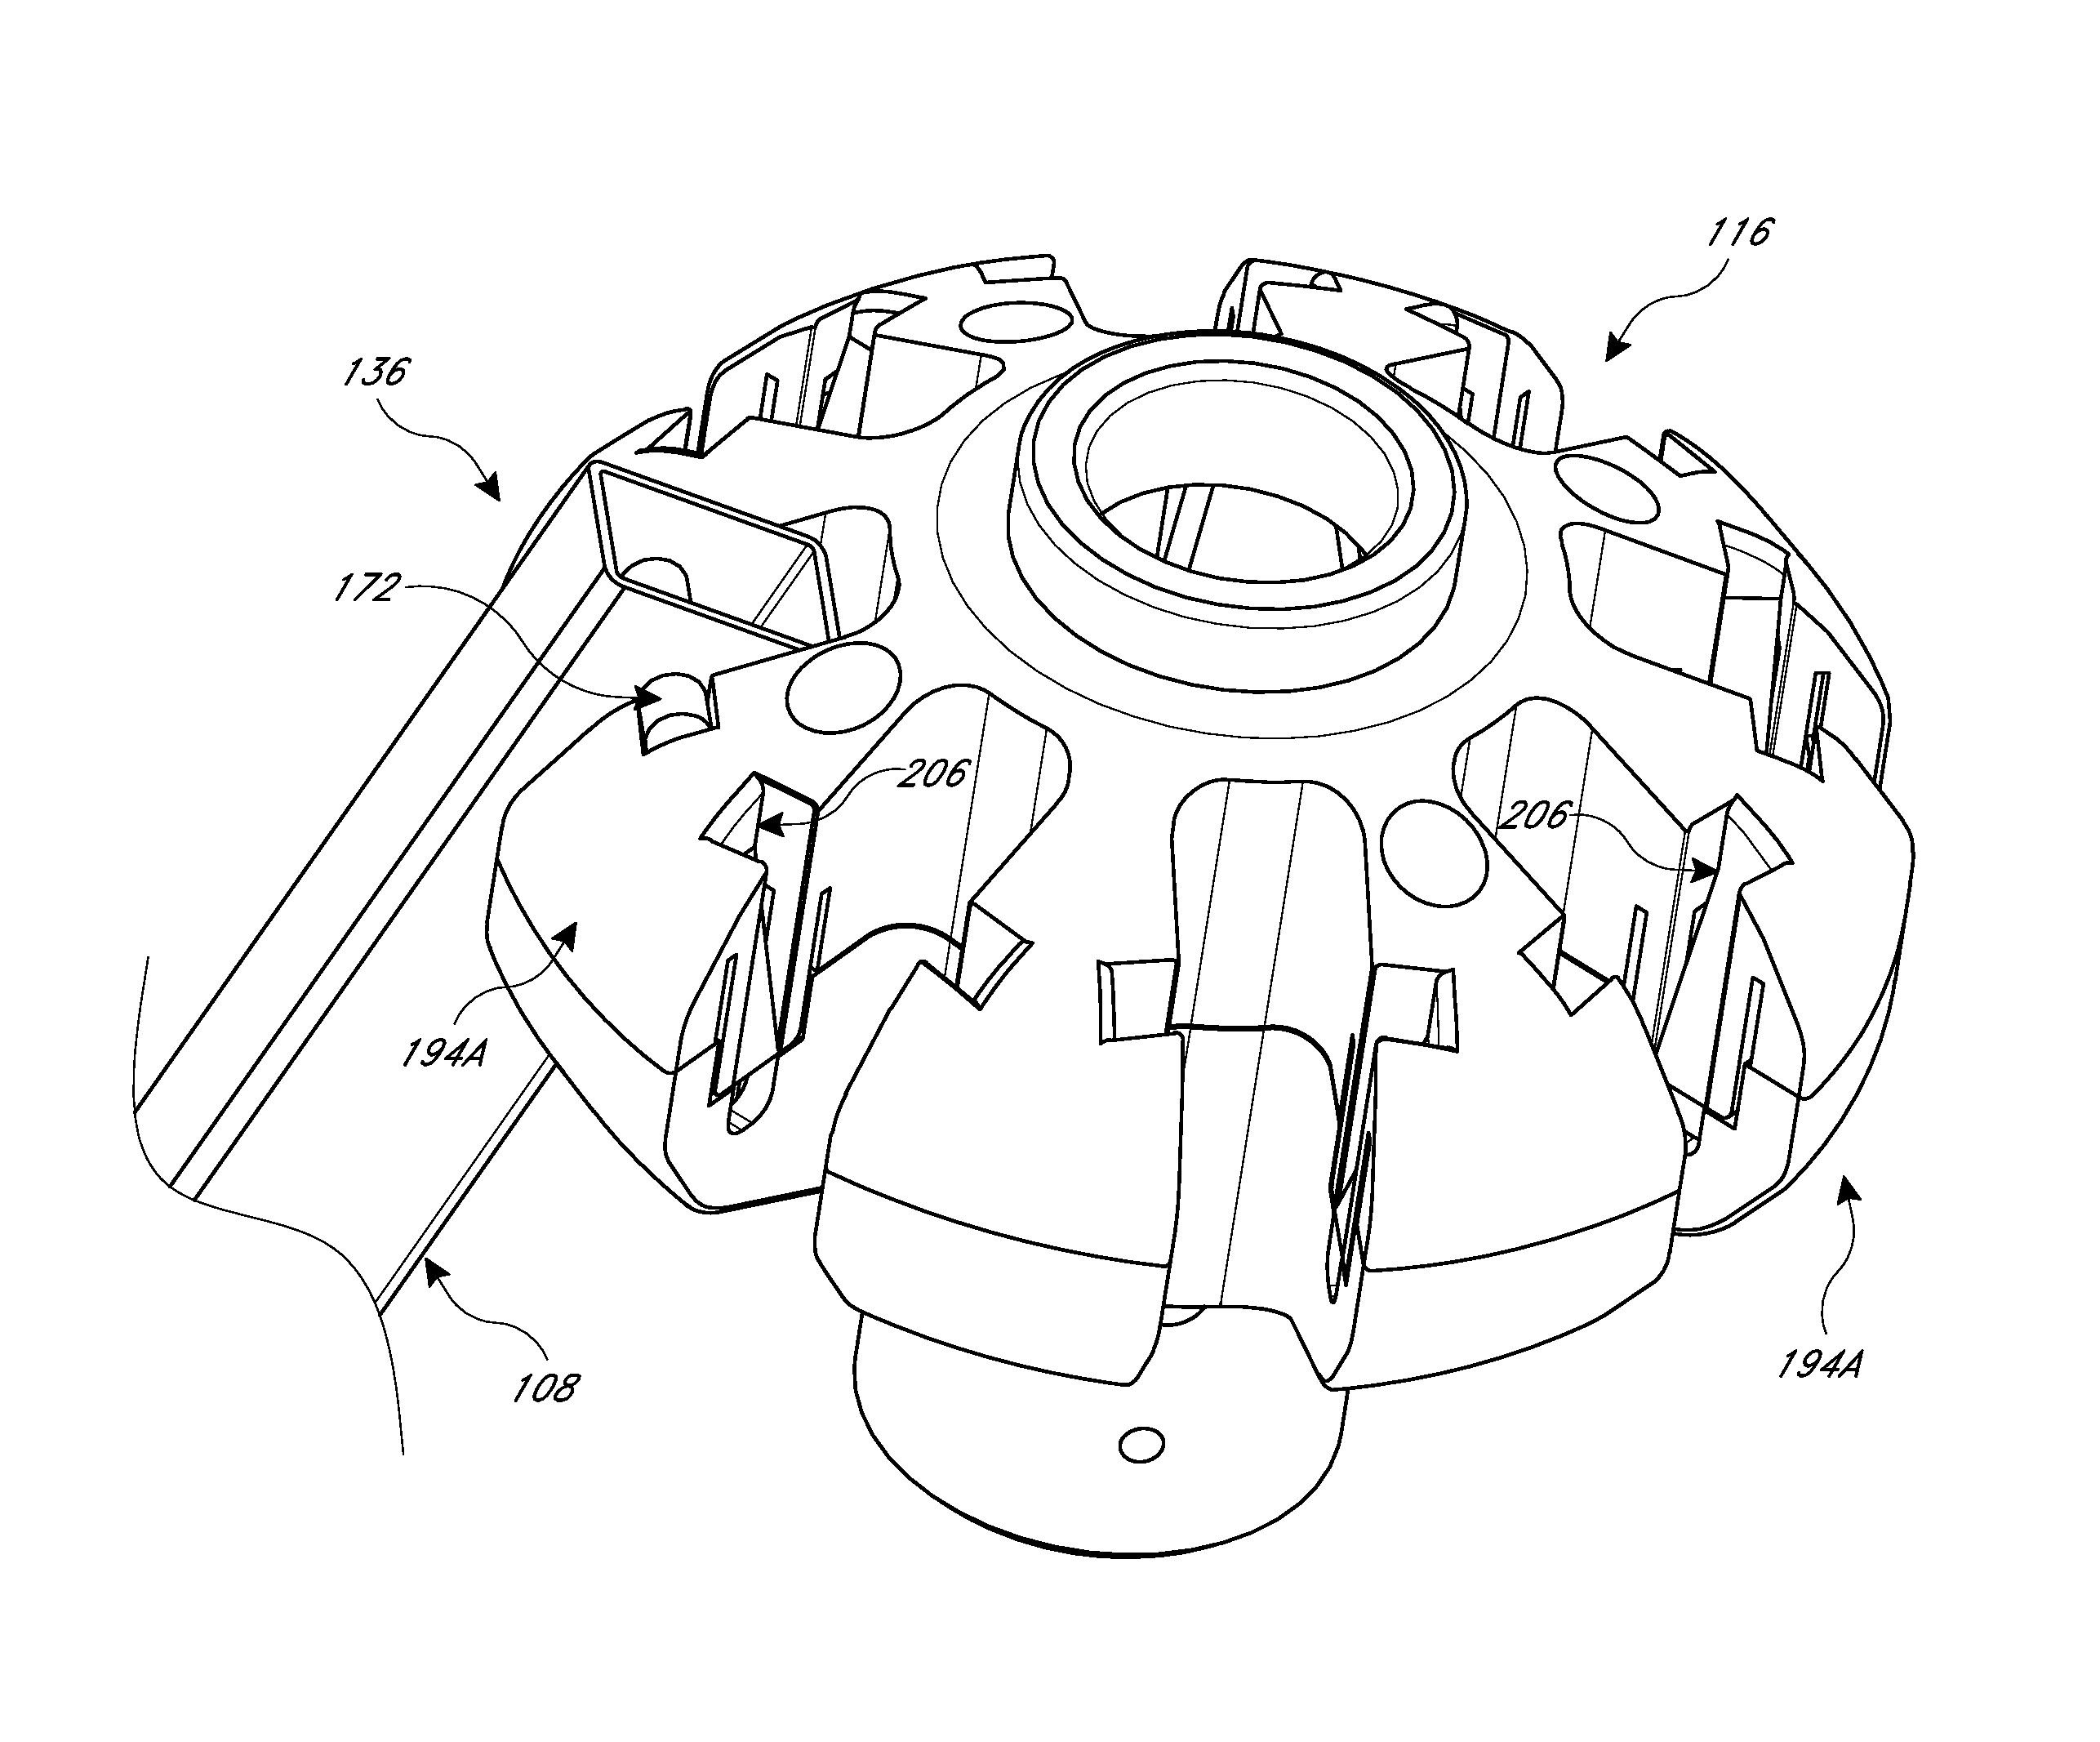 Quick assembly methods and components for shade structures